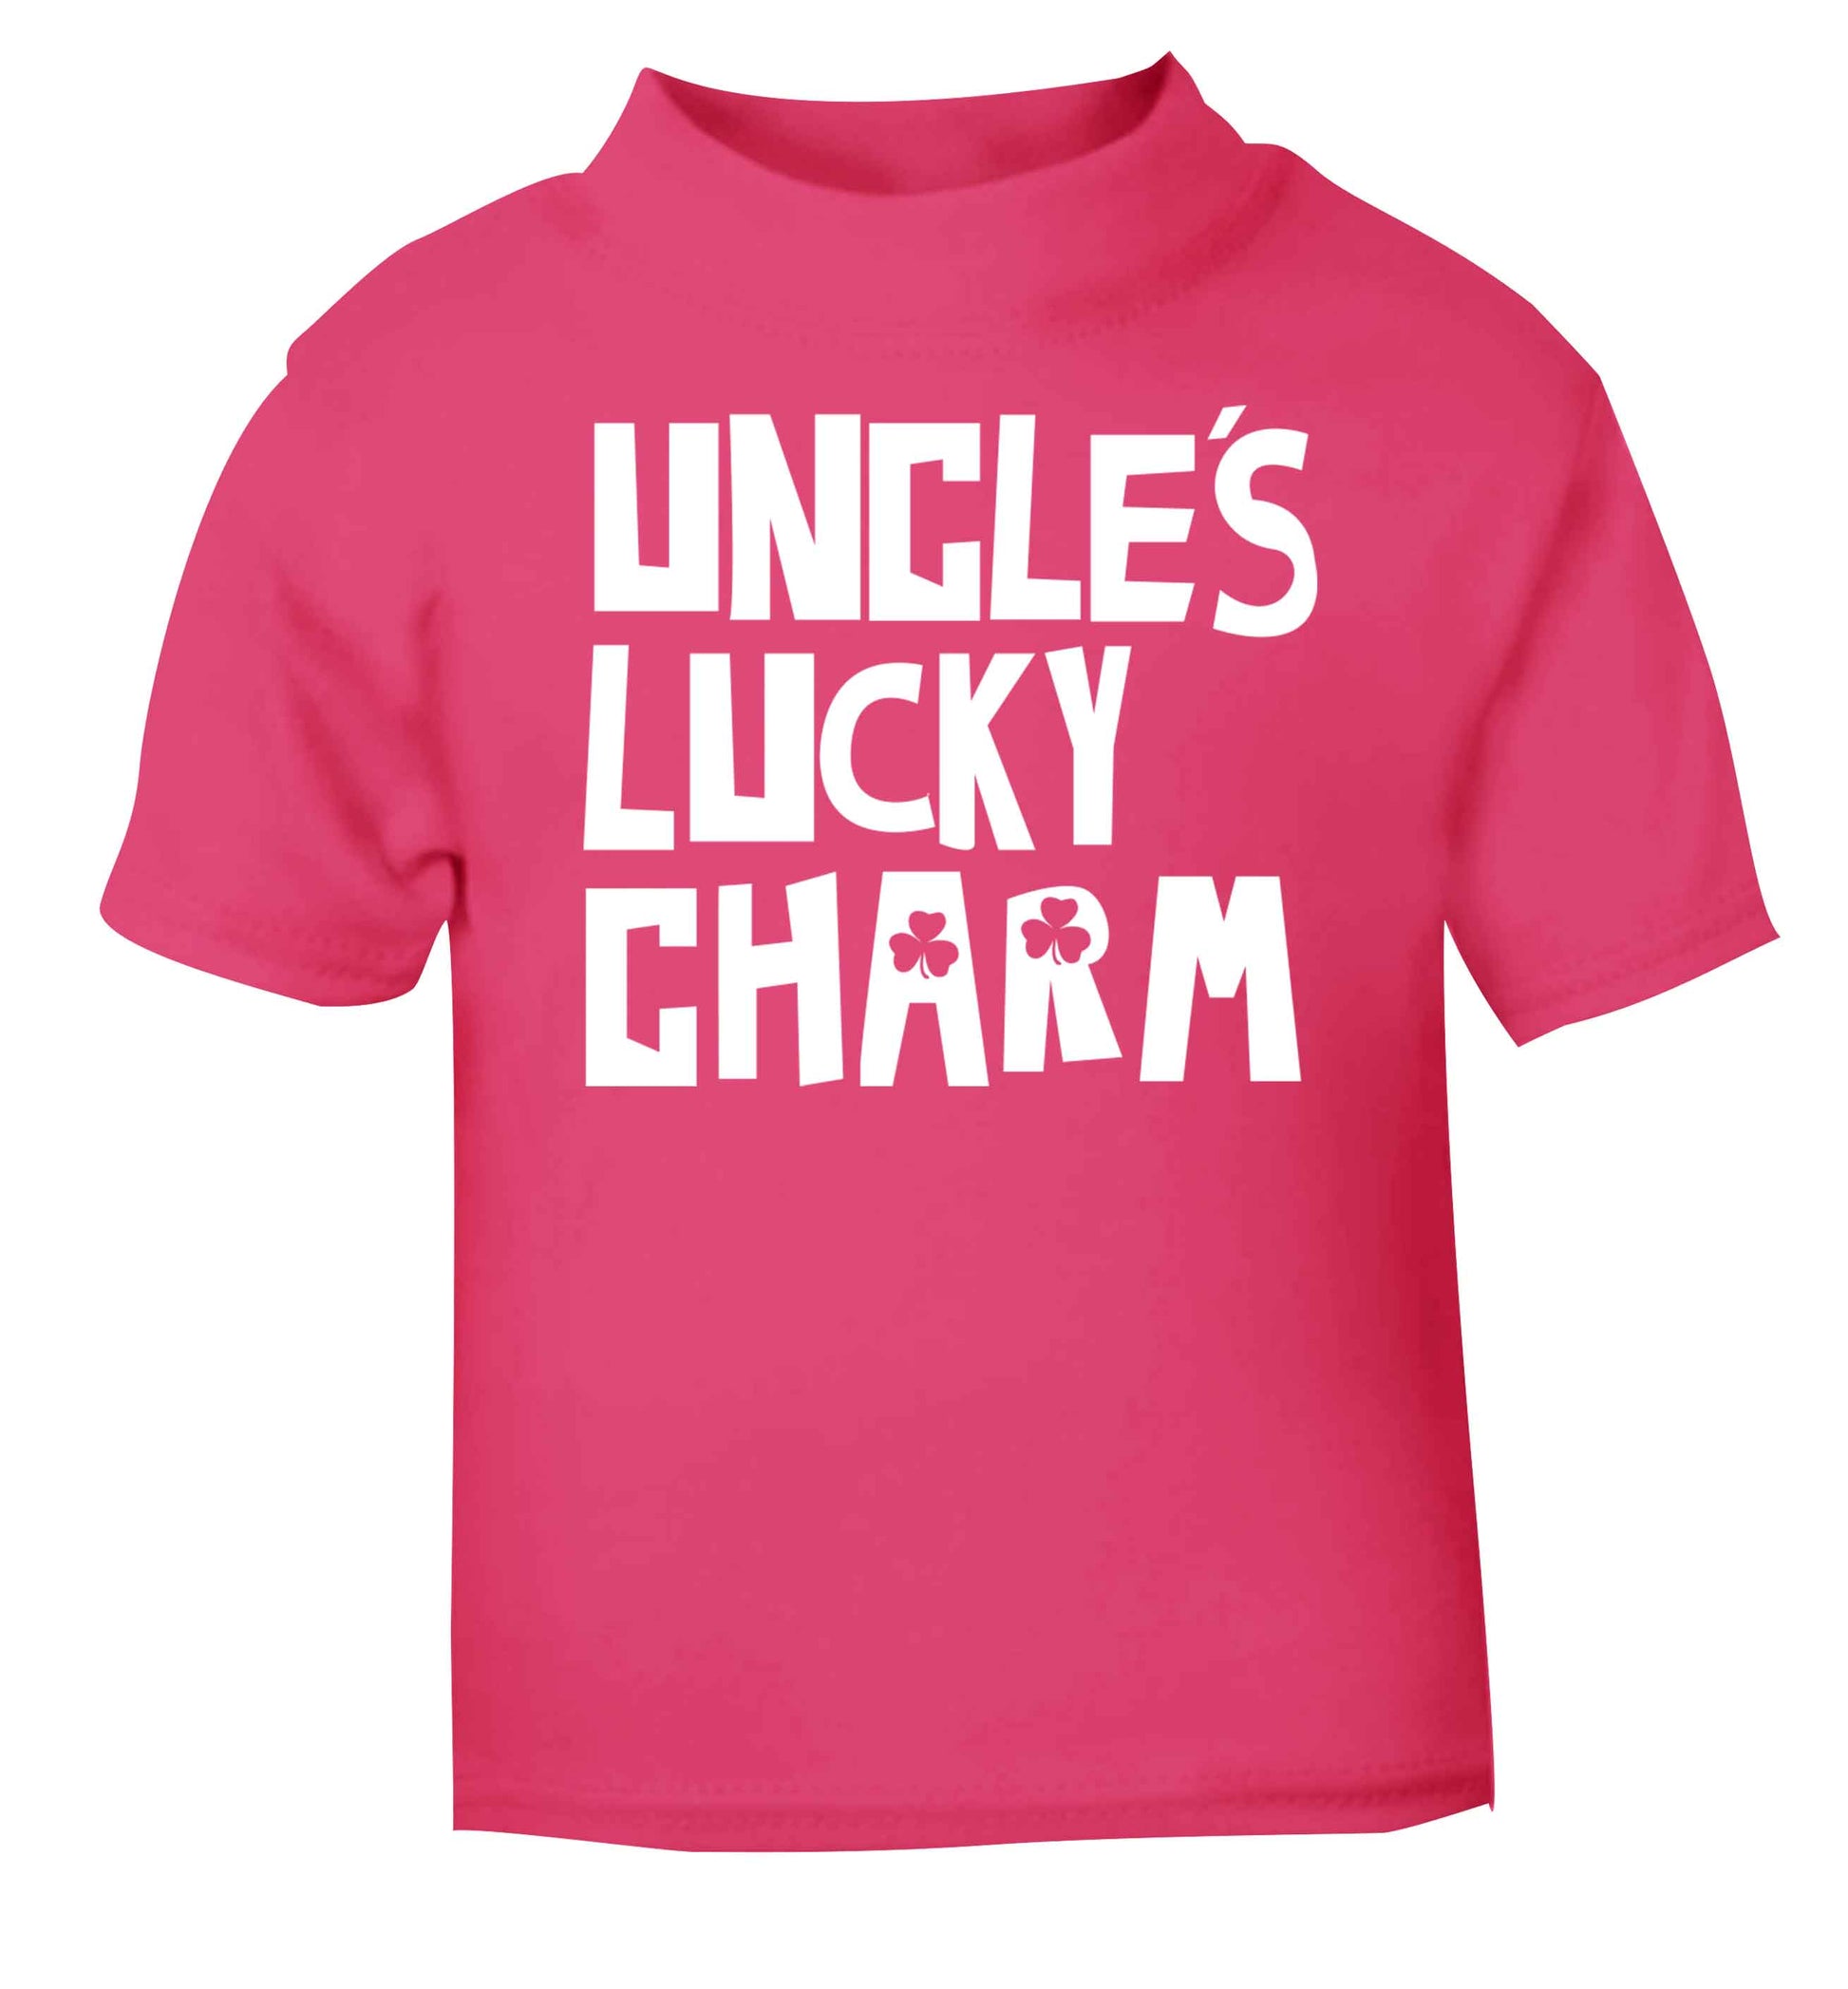 Uncles lucky charm pink baby toddler Tshirt 2 Years